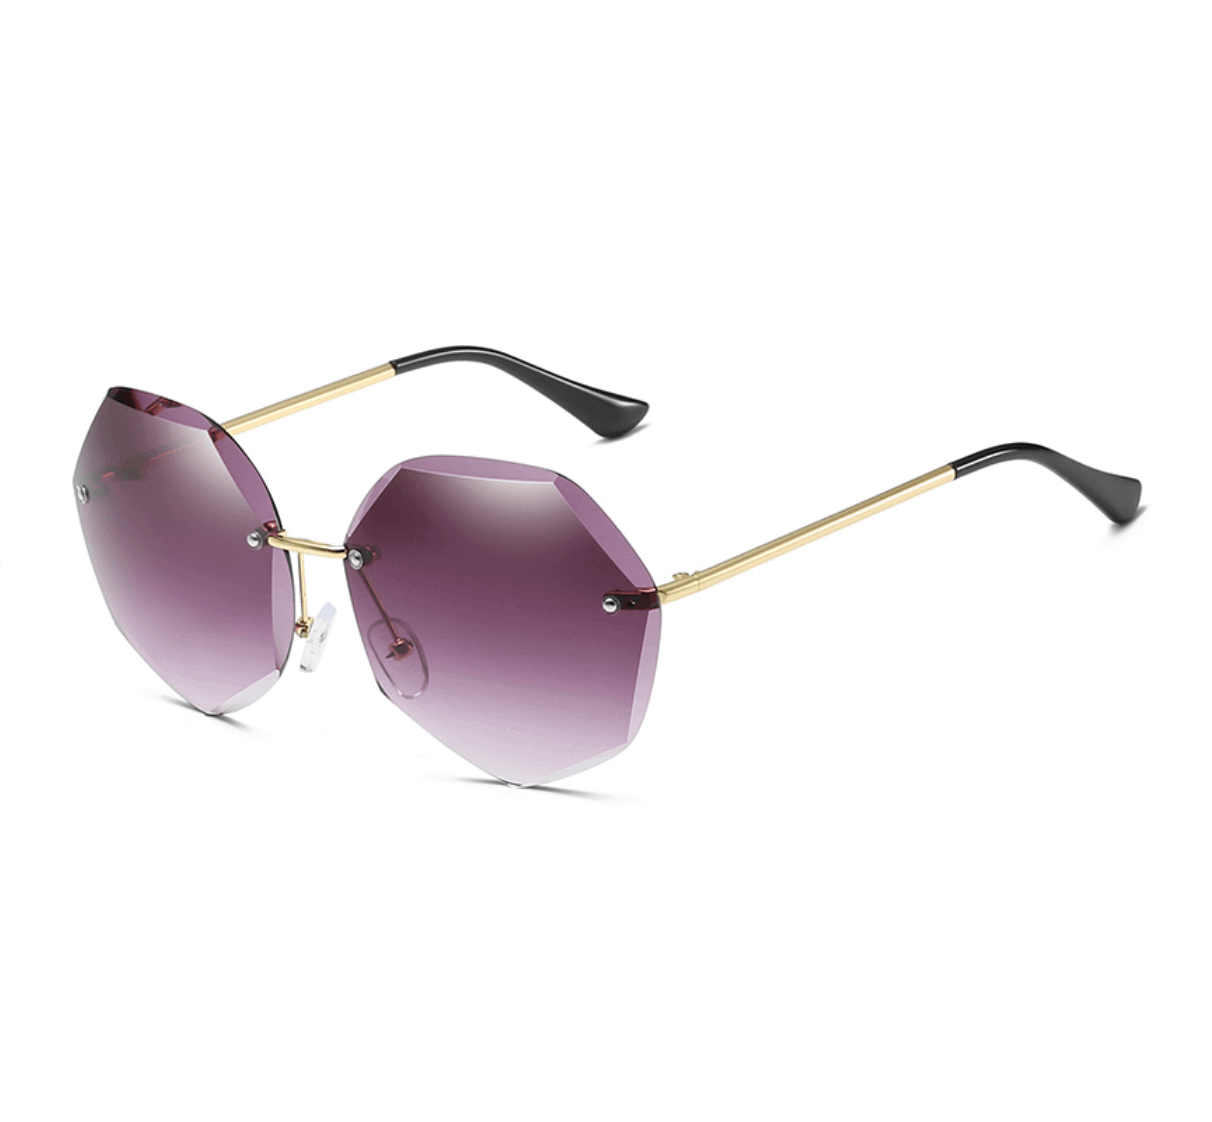 https://www.heappy.com/wp-content/uploads/2021/07/012.-wholesale-designer-sunglasses-by-the-dozen-wholesale-rimless-sunglasses-rimless-sunglasses-wholesale-wholesale-shades-sunglasses-sunglasses-supplier-Sunglasses-Manufacturer-in-China.png